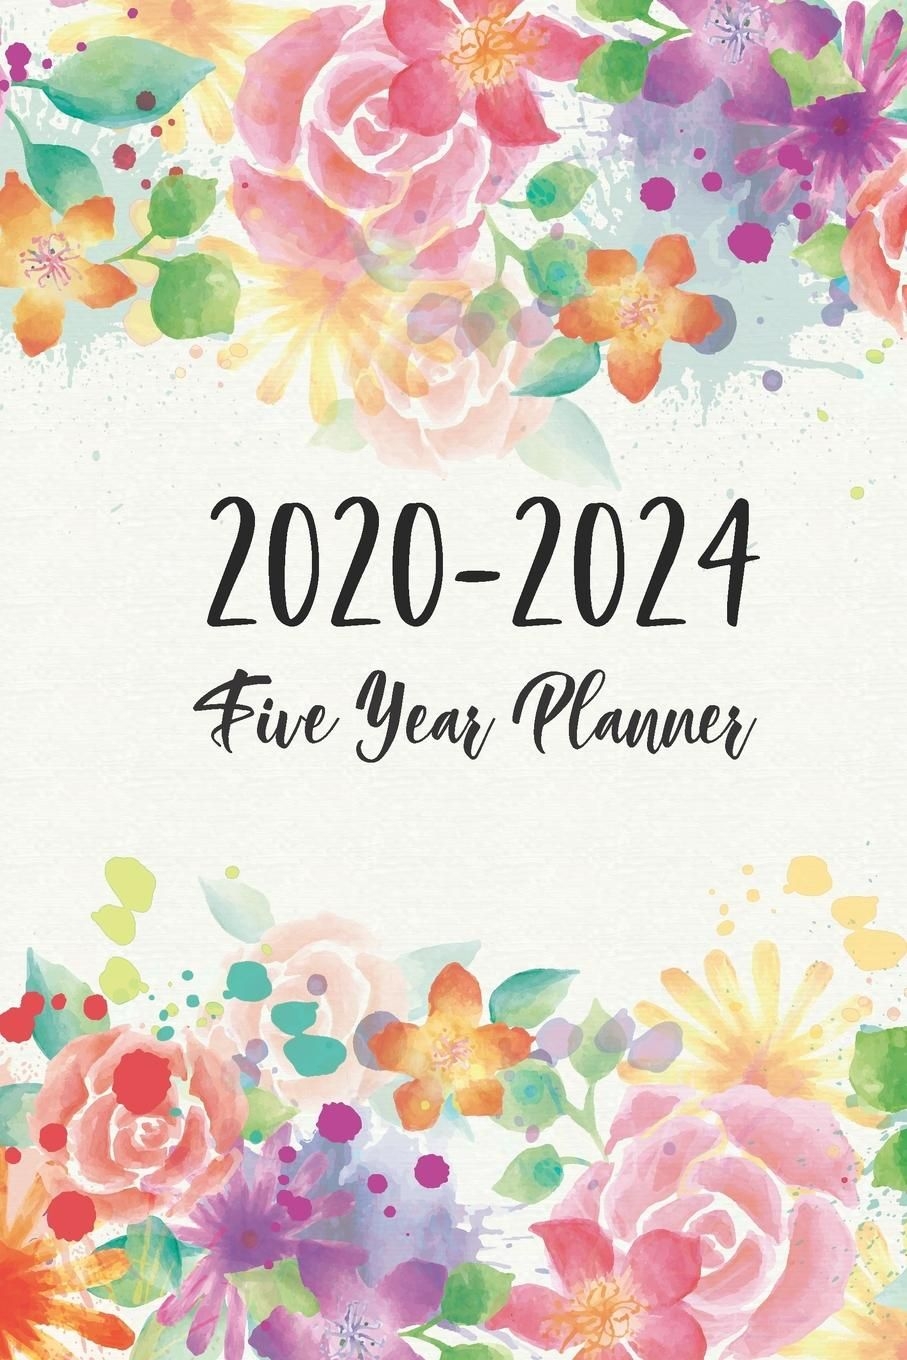 2020 2024 5 Year Monthly Calendar Planner: 2020 2024 Five Year Planner: Flower Cover 2020 2024 Monthly Schedule Organizer 60 Month Yearly